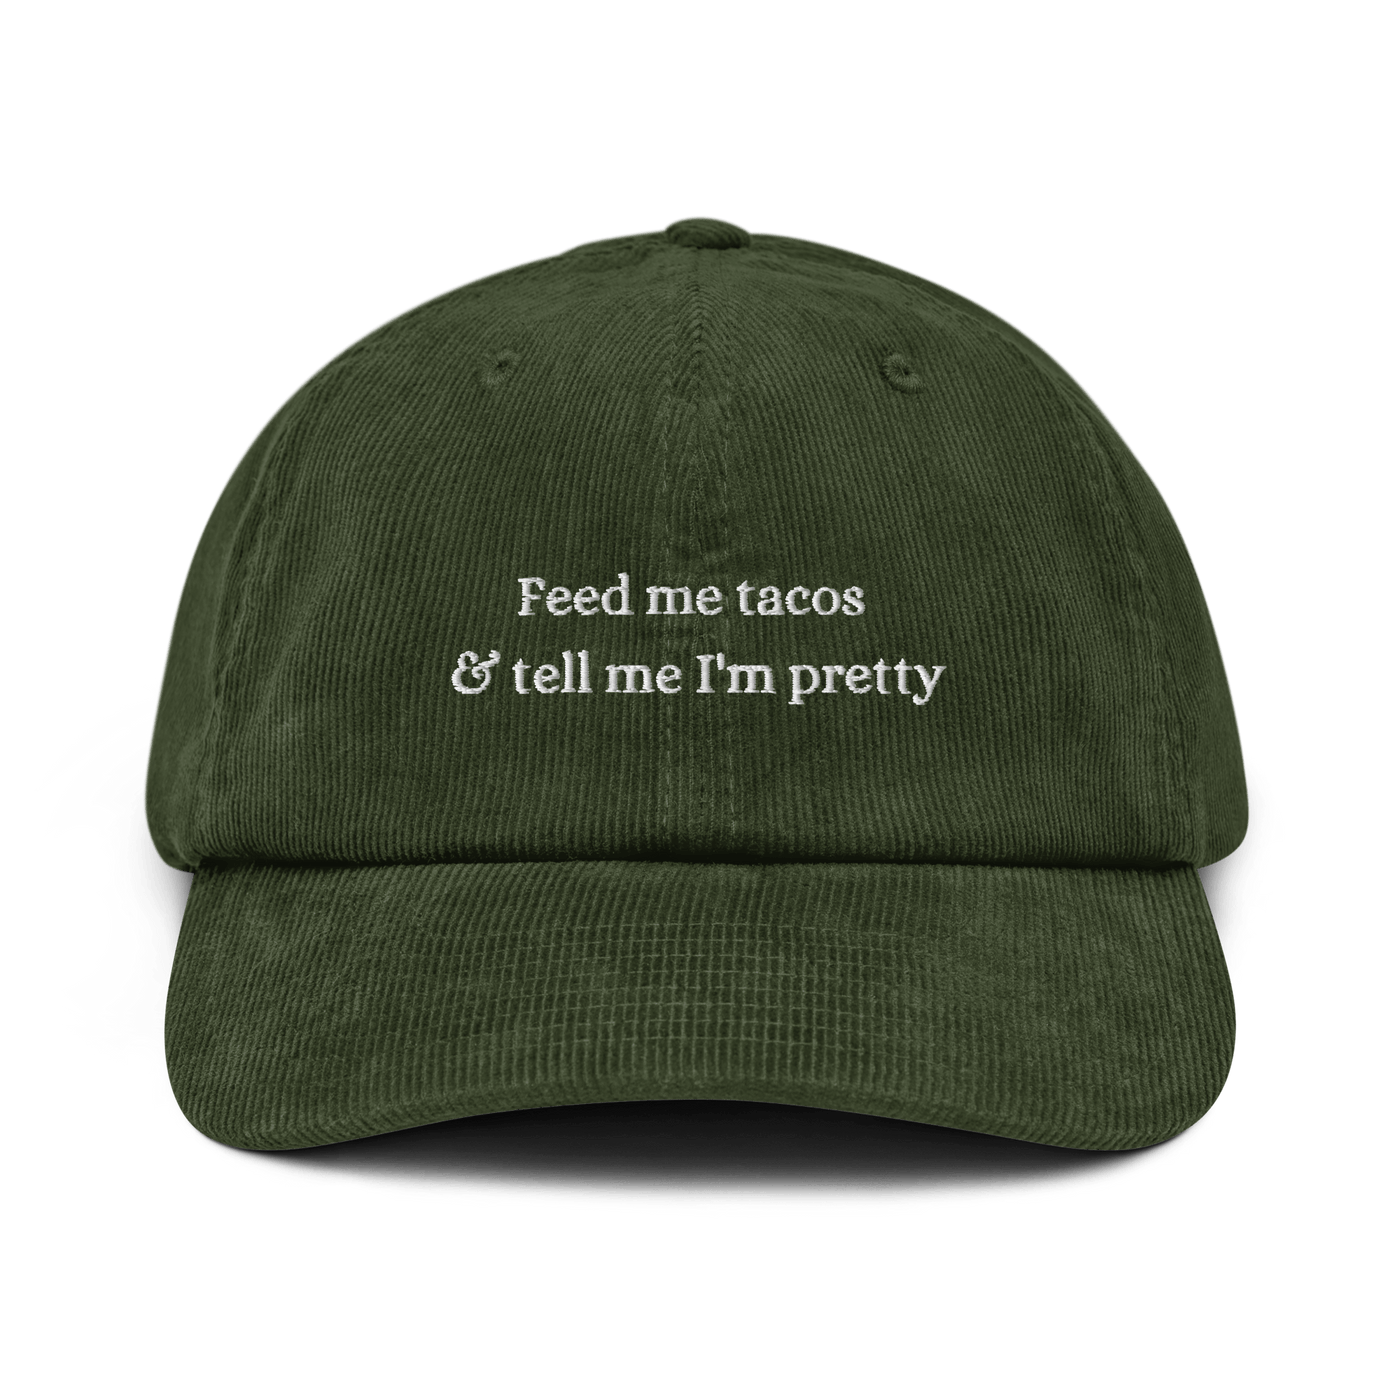 Feed me tacos Corduroy hat - Dark Olive - - Just Another Cap Store